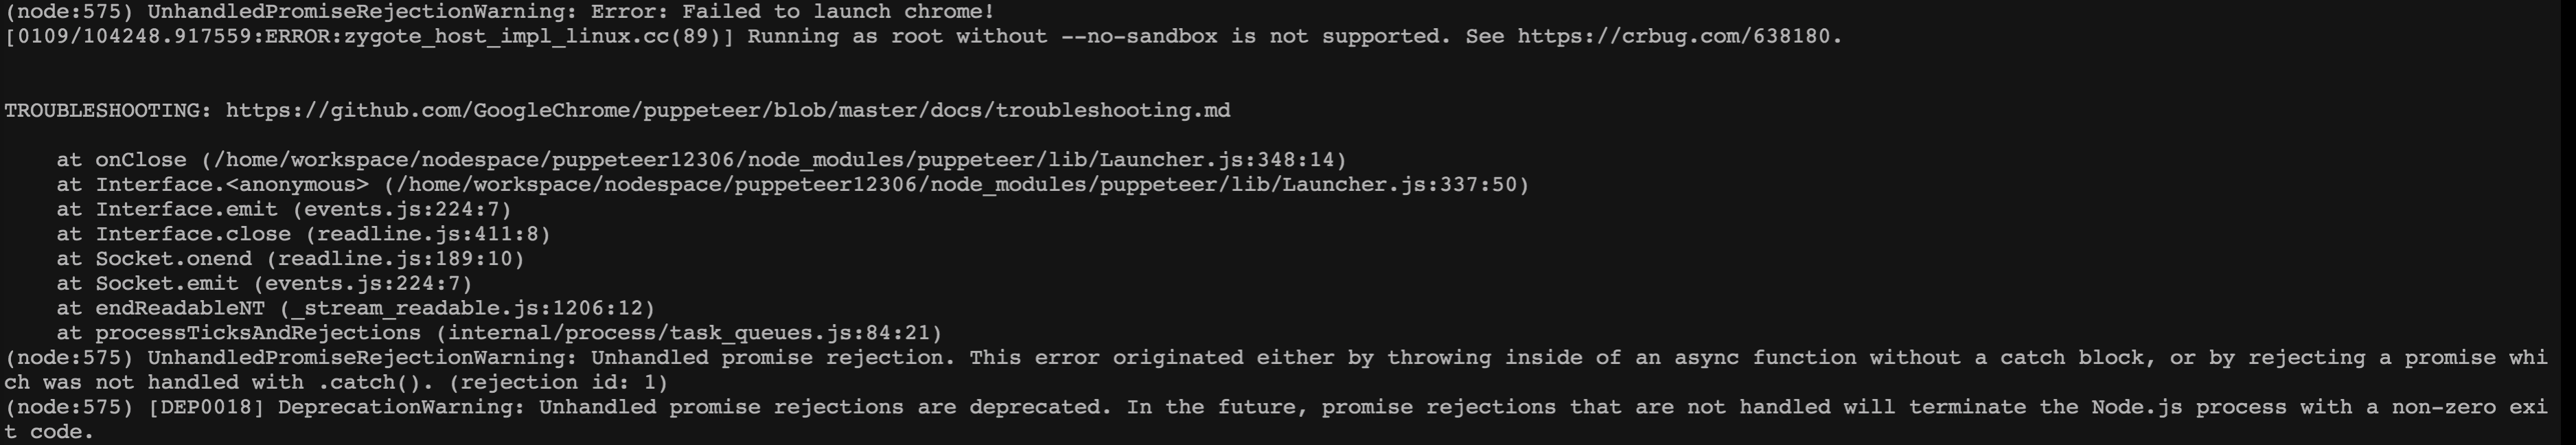 Running as root without --no-sandox is not supported